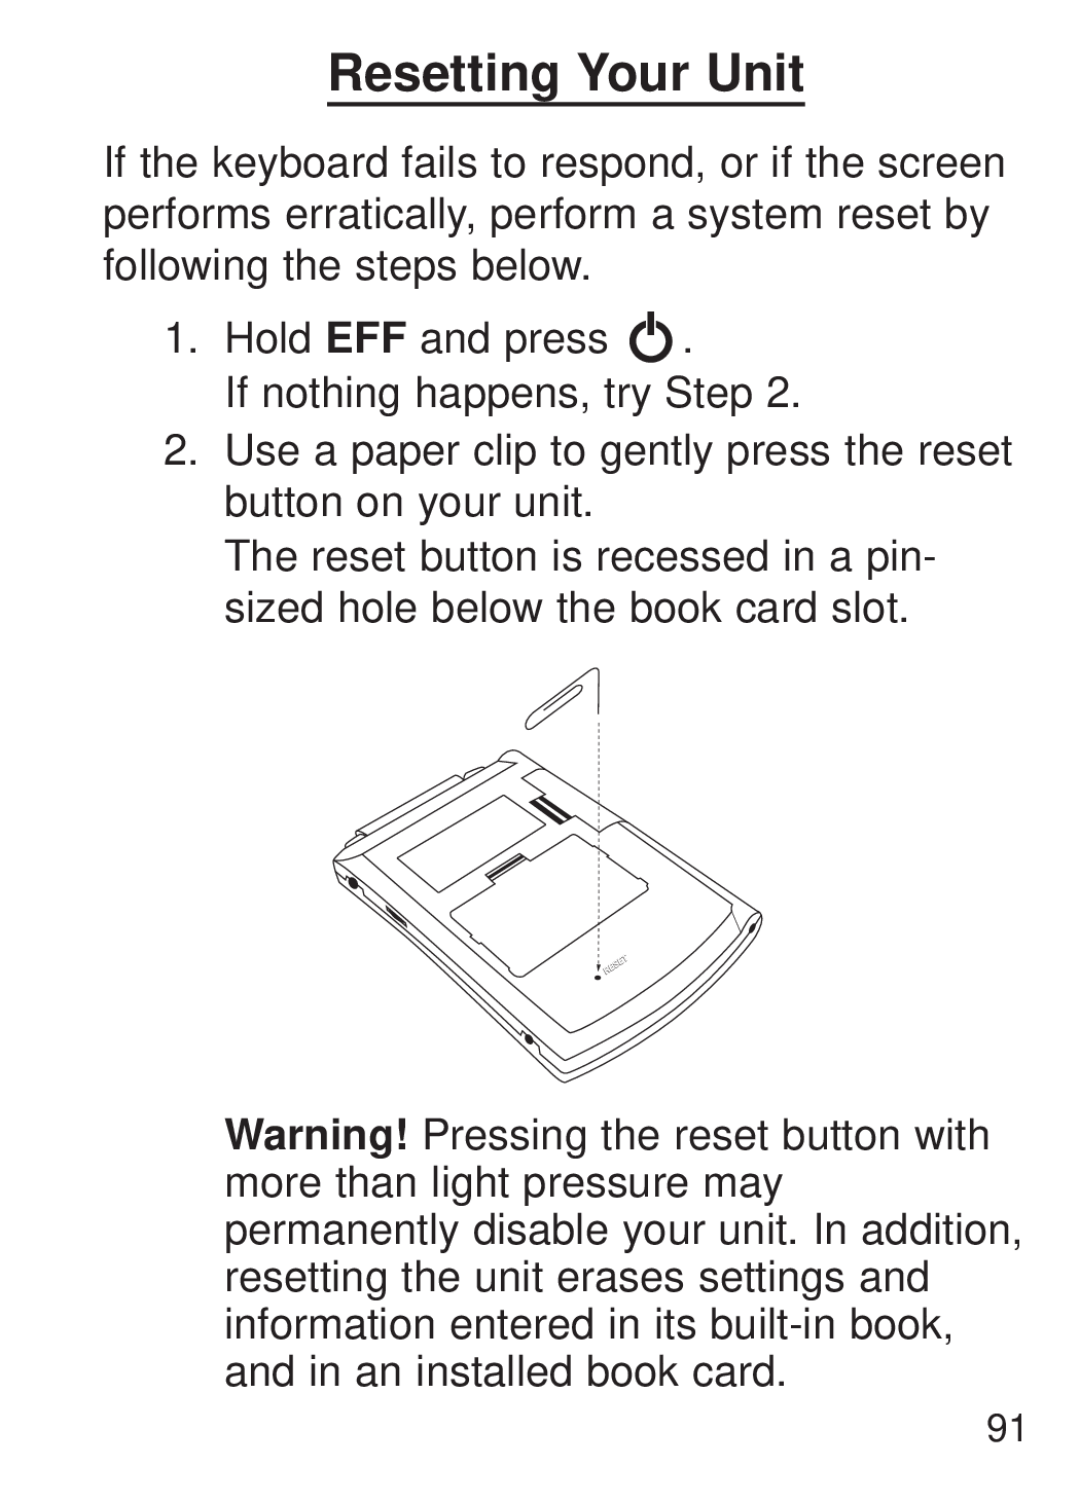 Franklin FQS-1870 manual Resetting Your Unit 